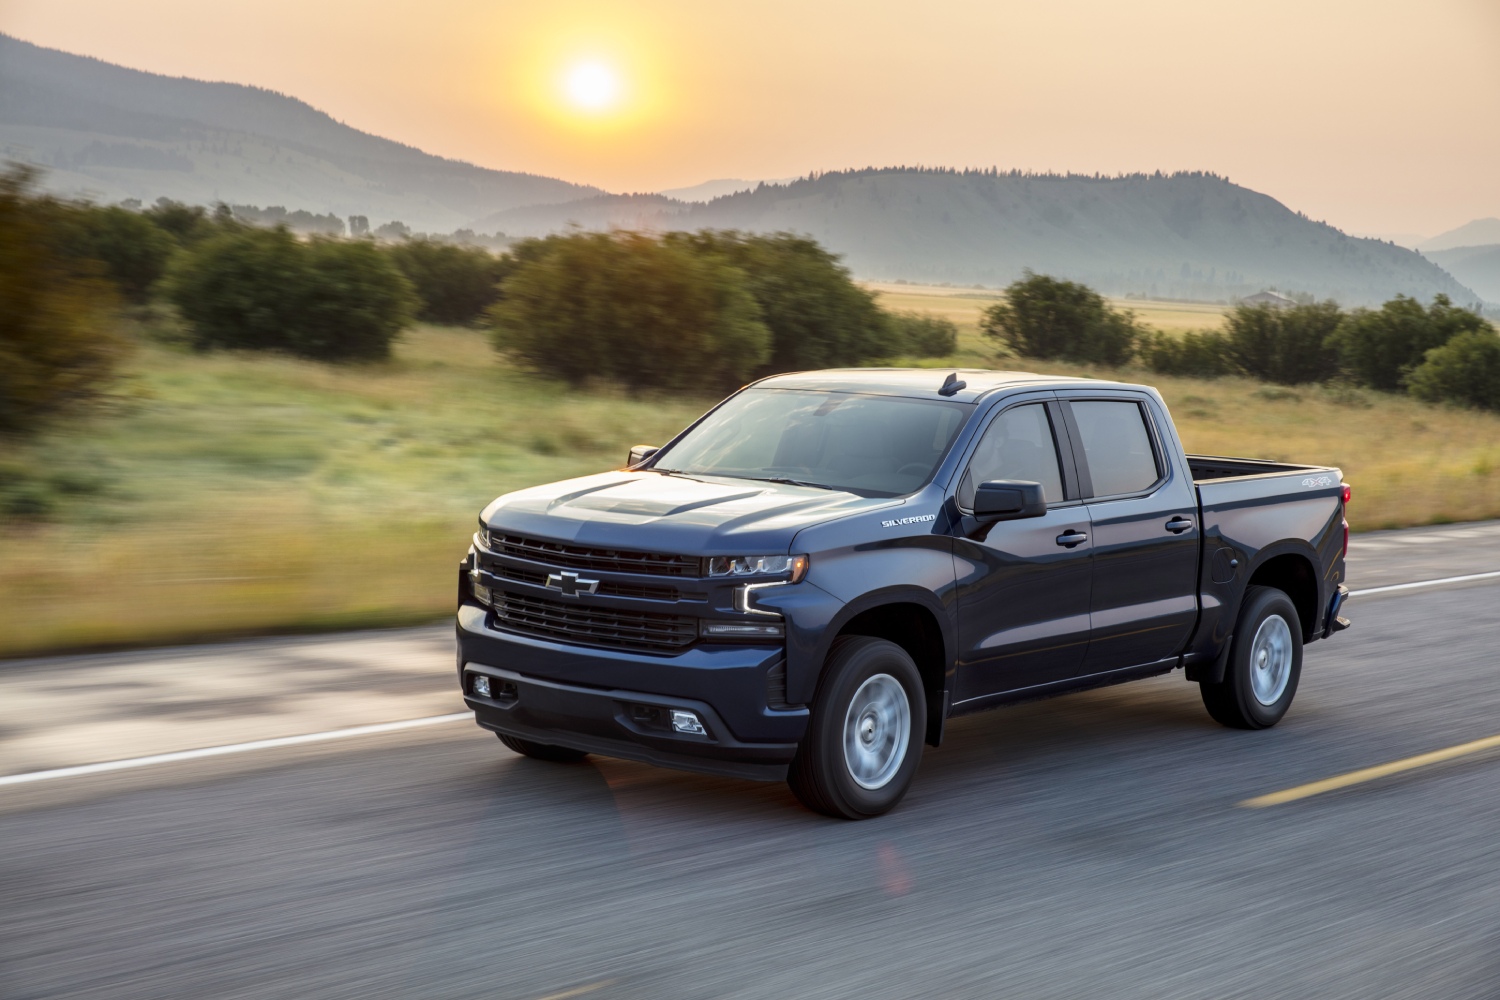 Fuel-efficient pickup trucks that can tow like this Chevrolet Silverado